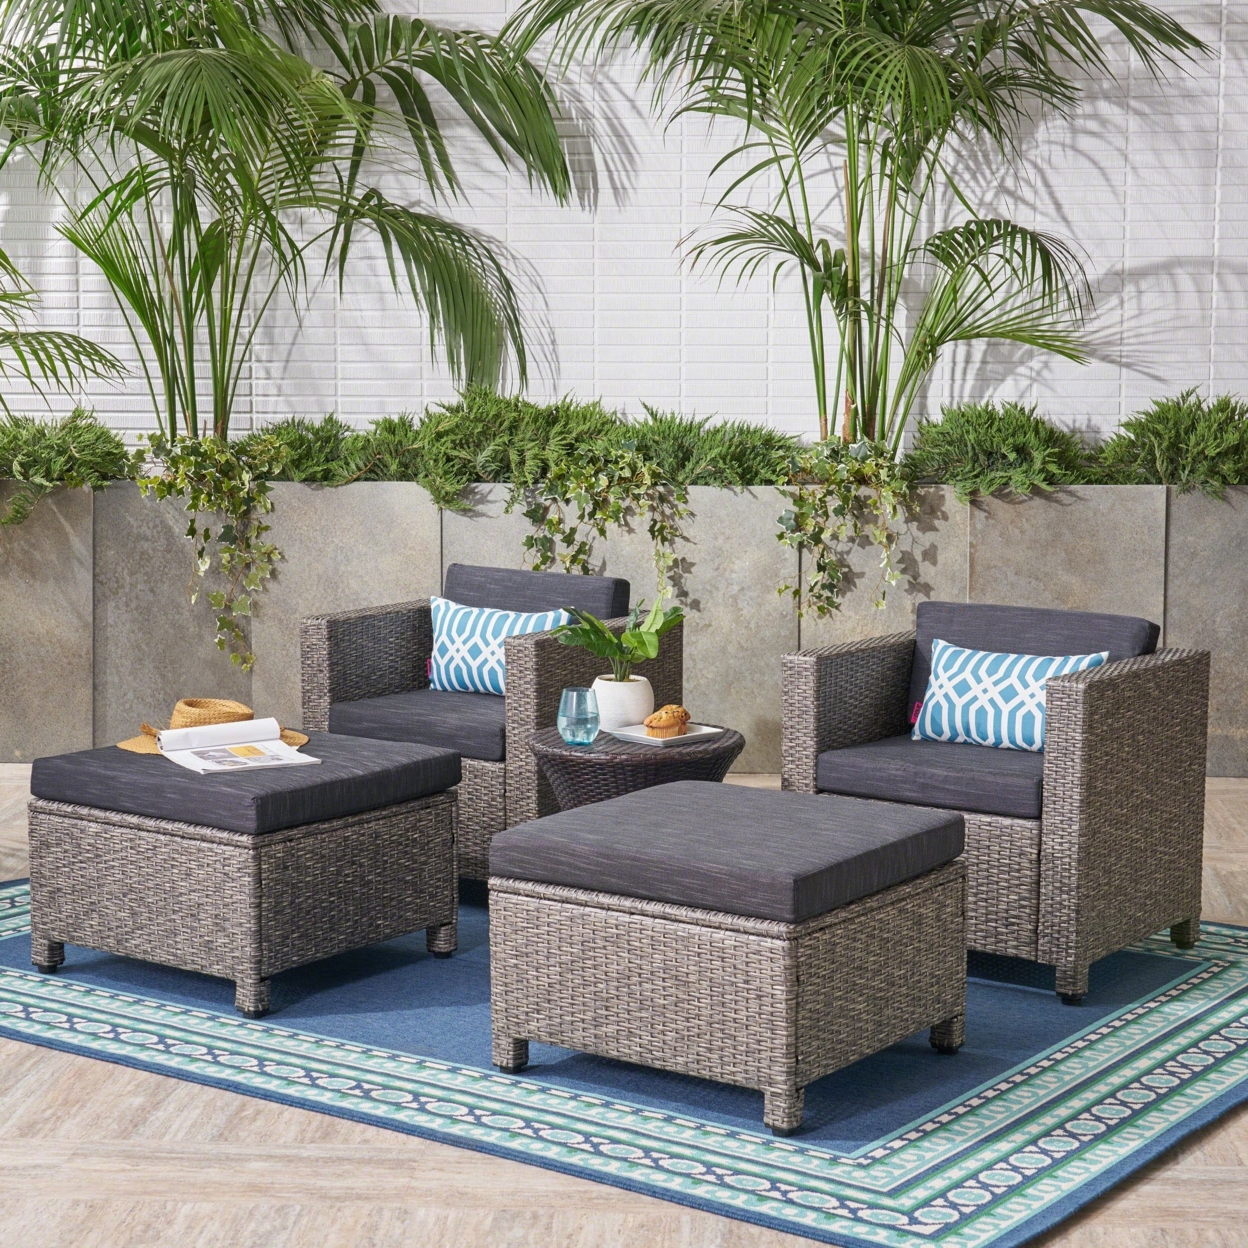 Buzz Outdoor 4 Piece Wicker Club Chair And Ottoman Set, Mixed Black With Dark Grey Cushions